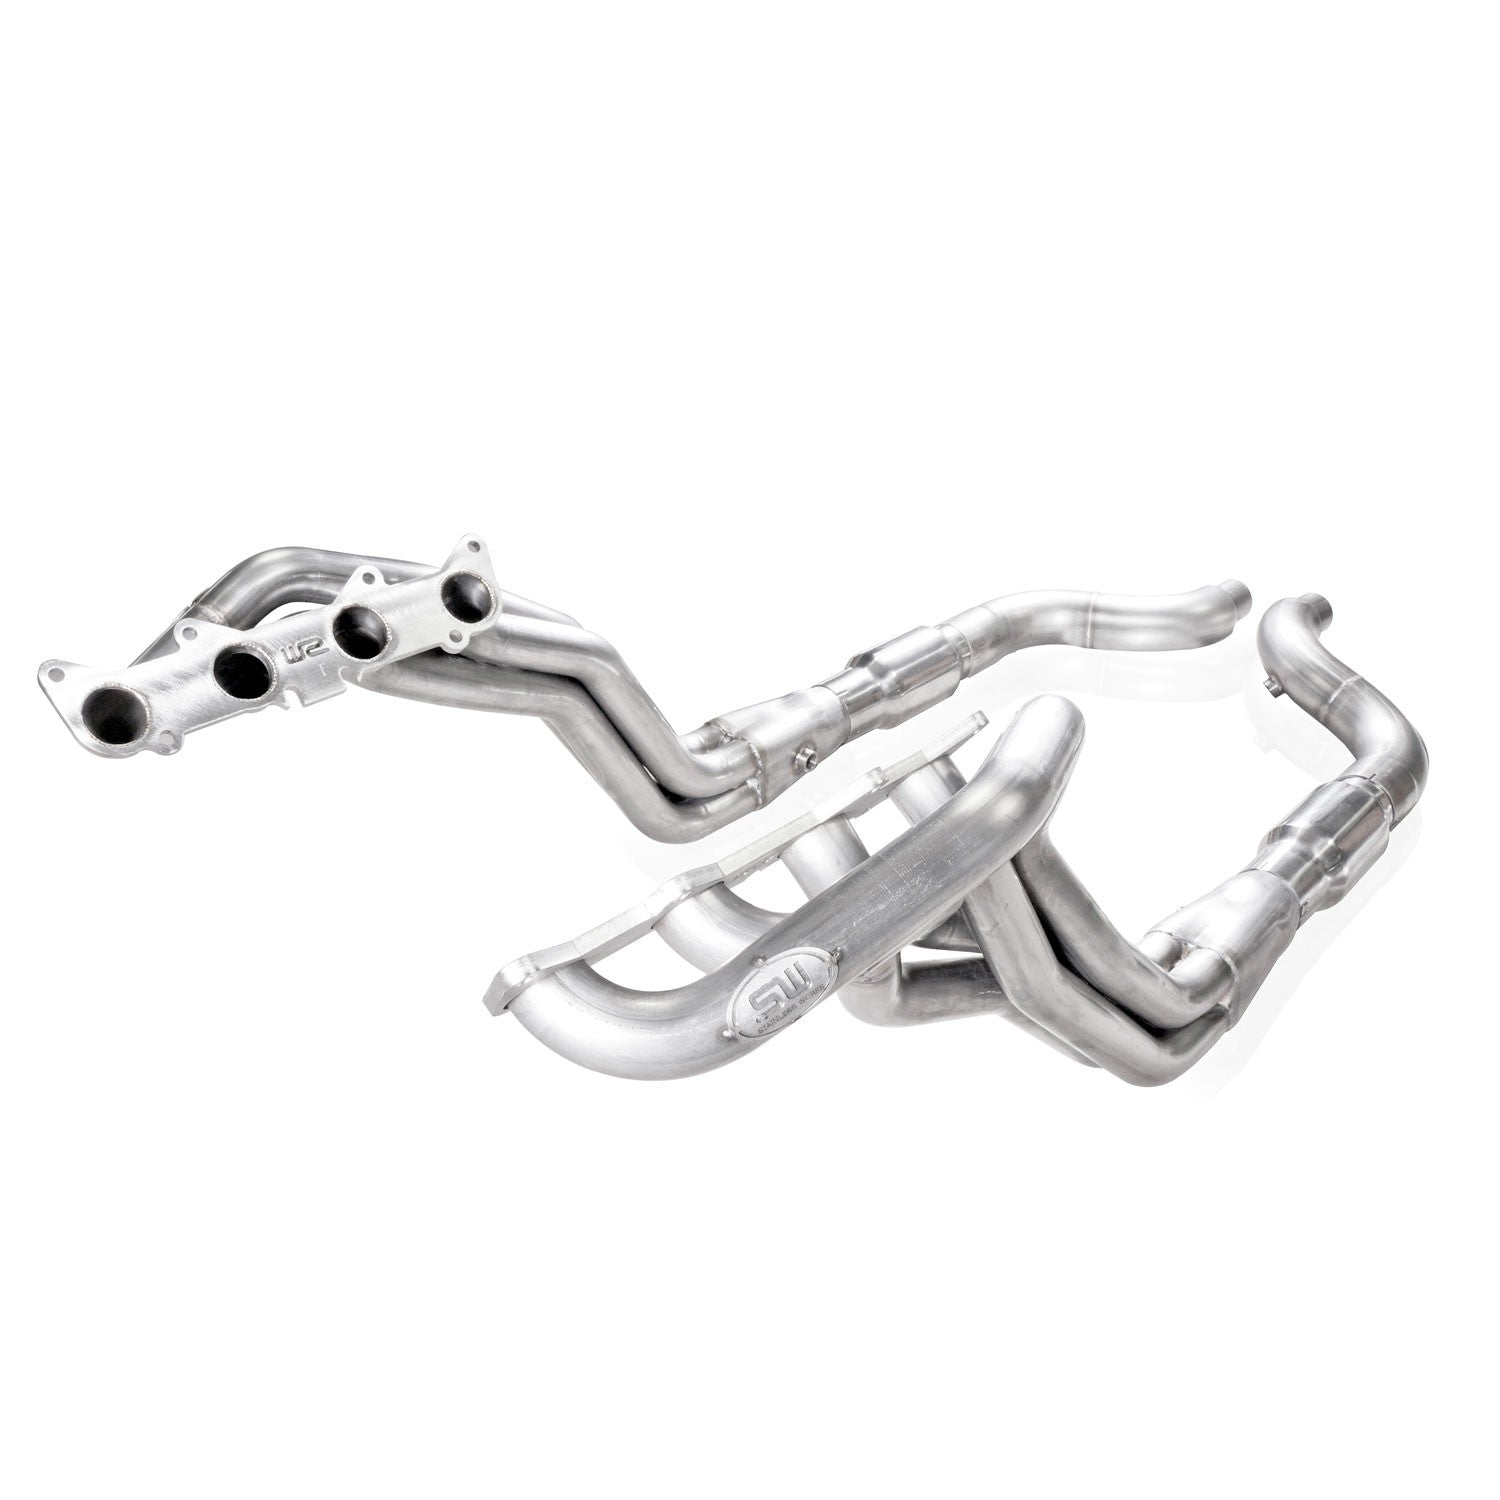 Stainless Works Ford Mustang GT 2015-17 Headers 1-7/8" M15H-PRODUCTS